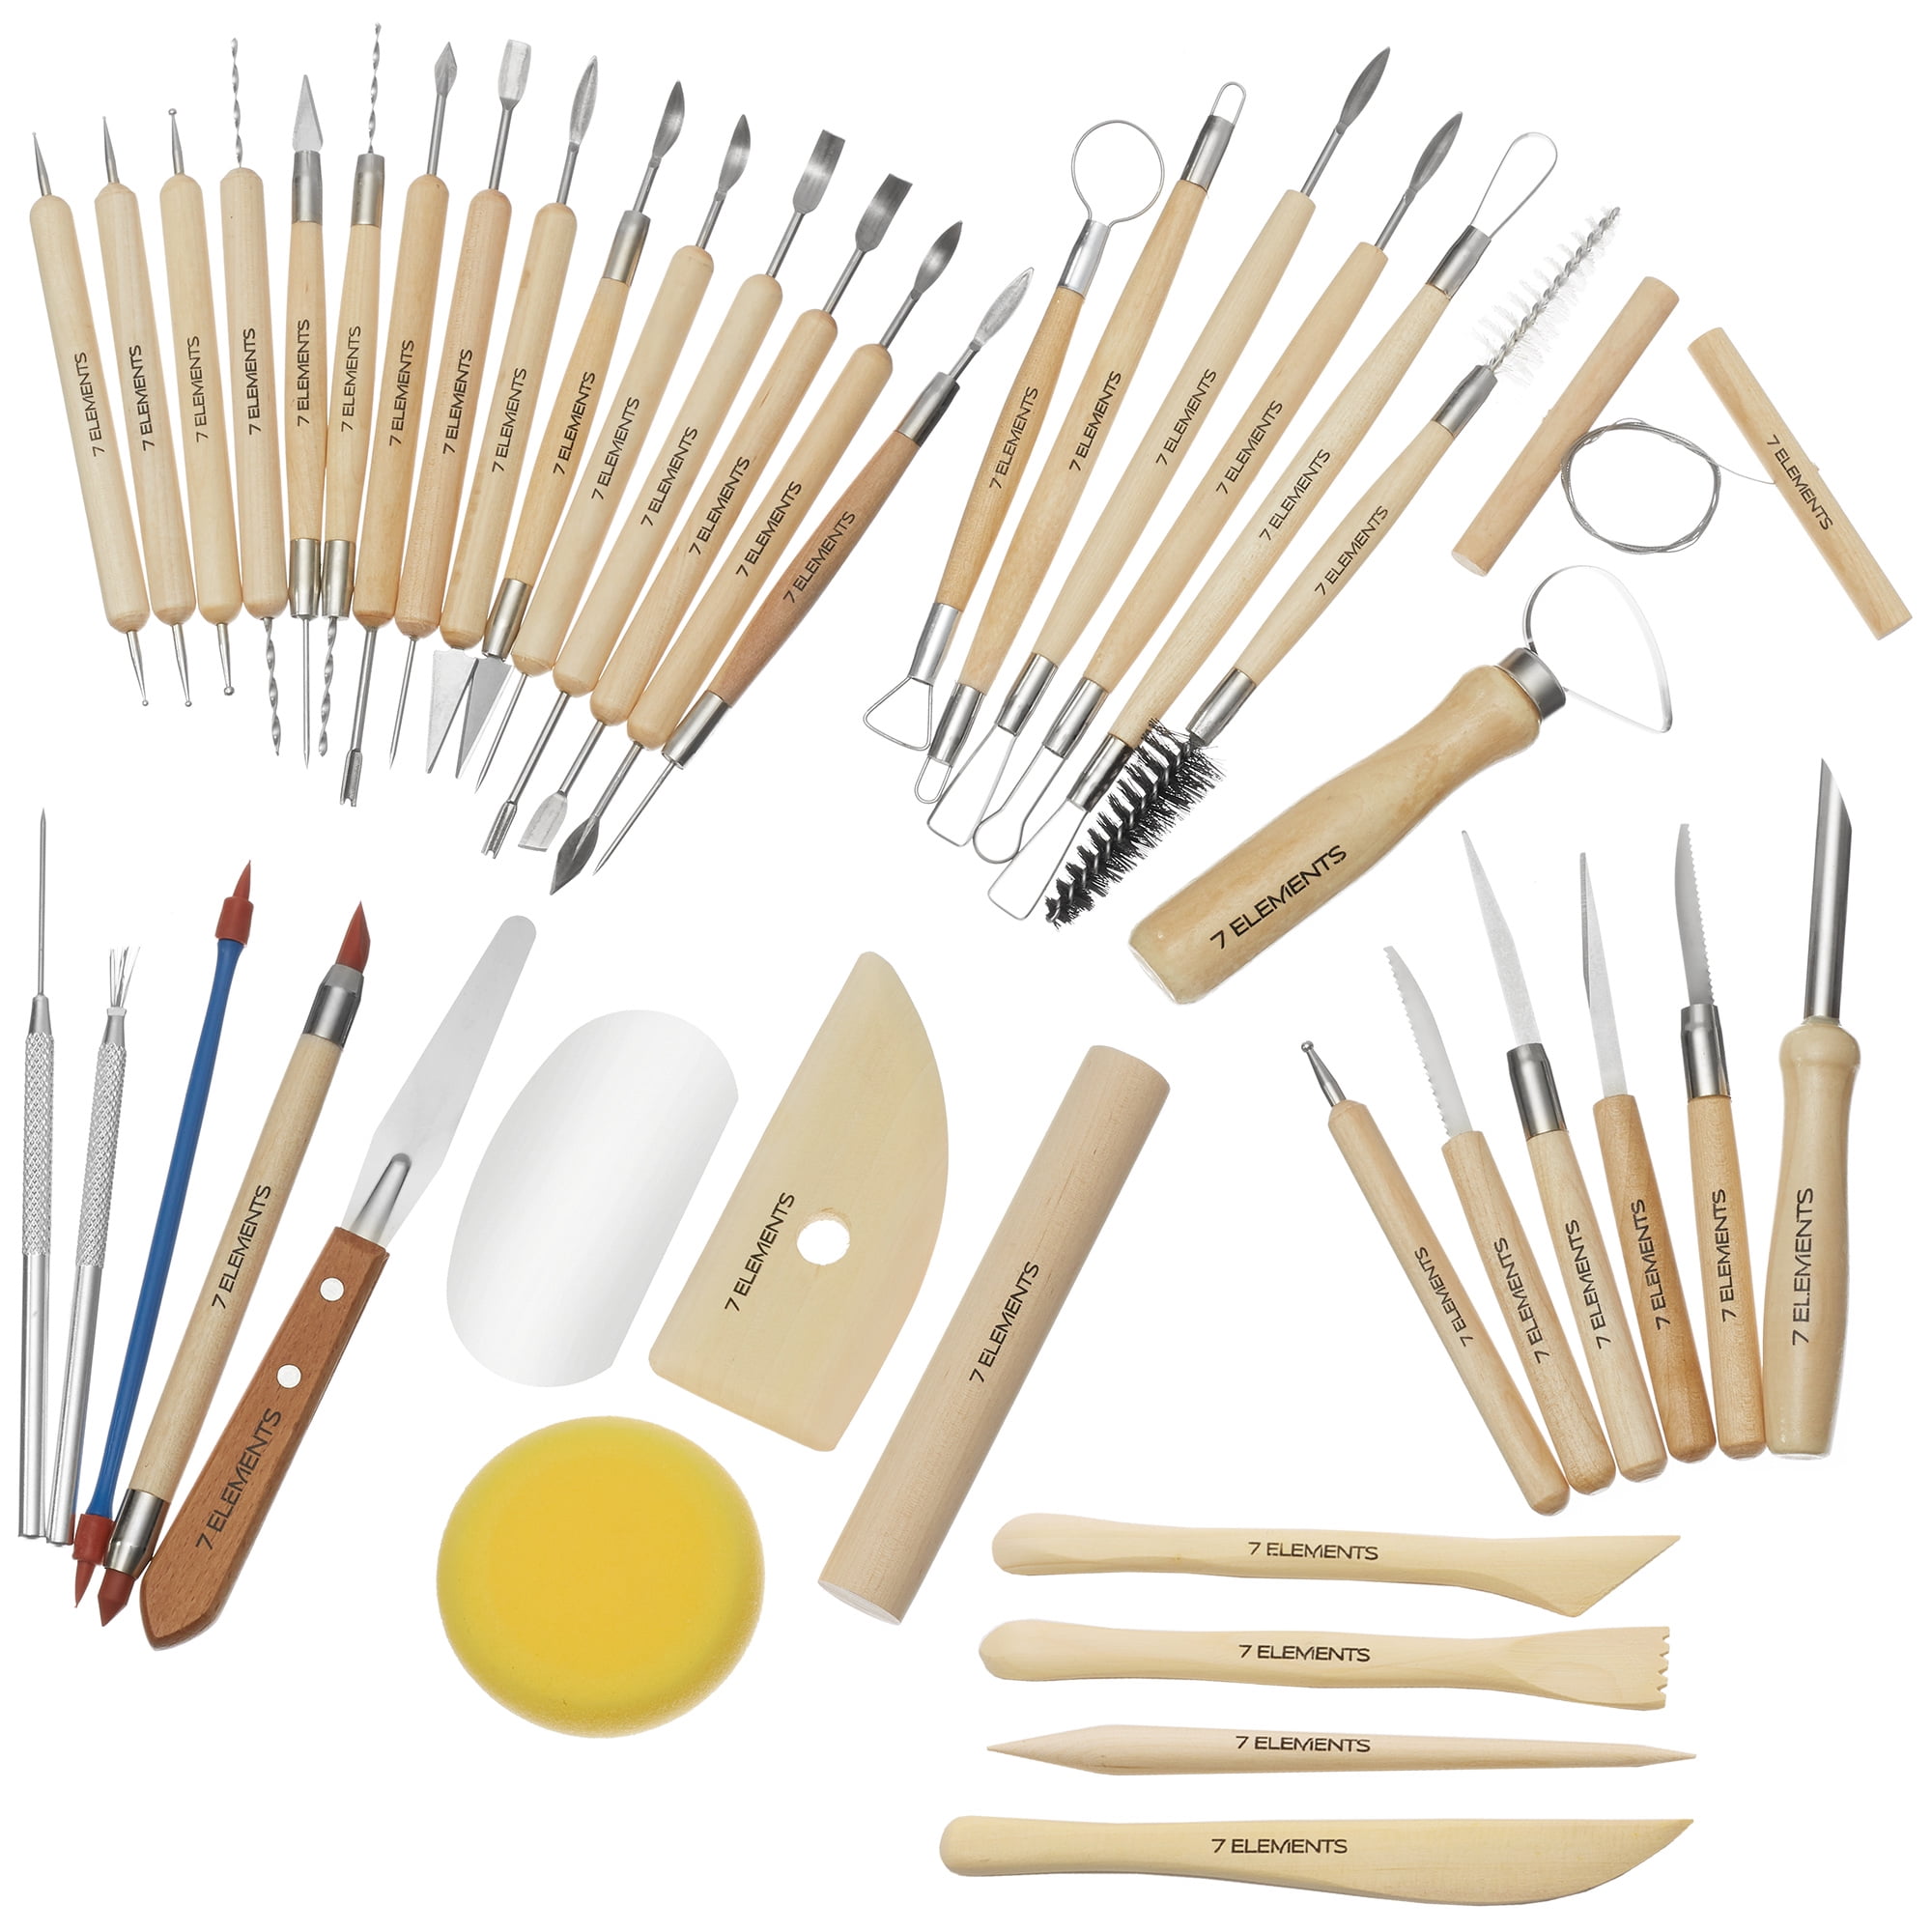 12PK CYNAMED Stainless Steel Spatula Wax & Clay Sculpting Tool Carver Set 